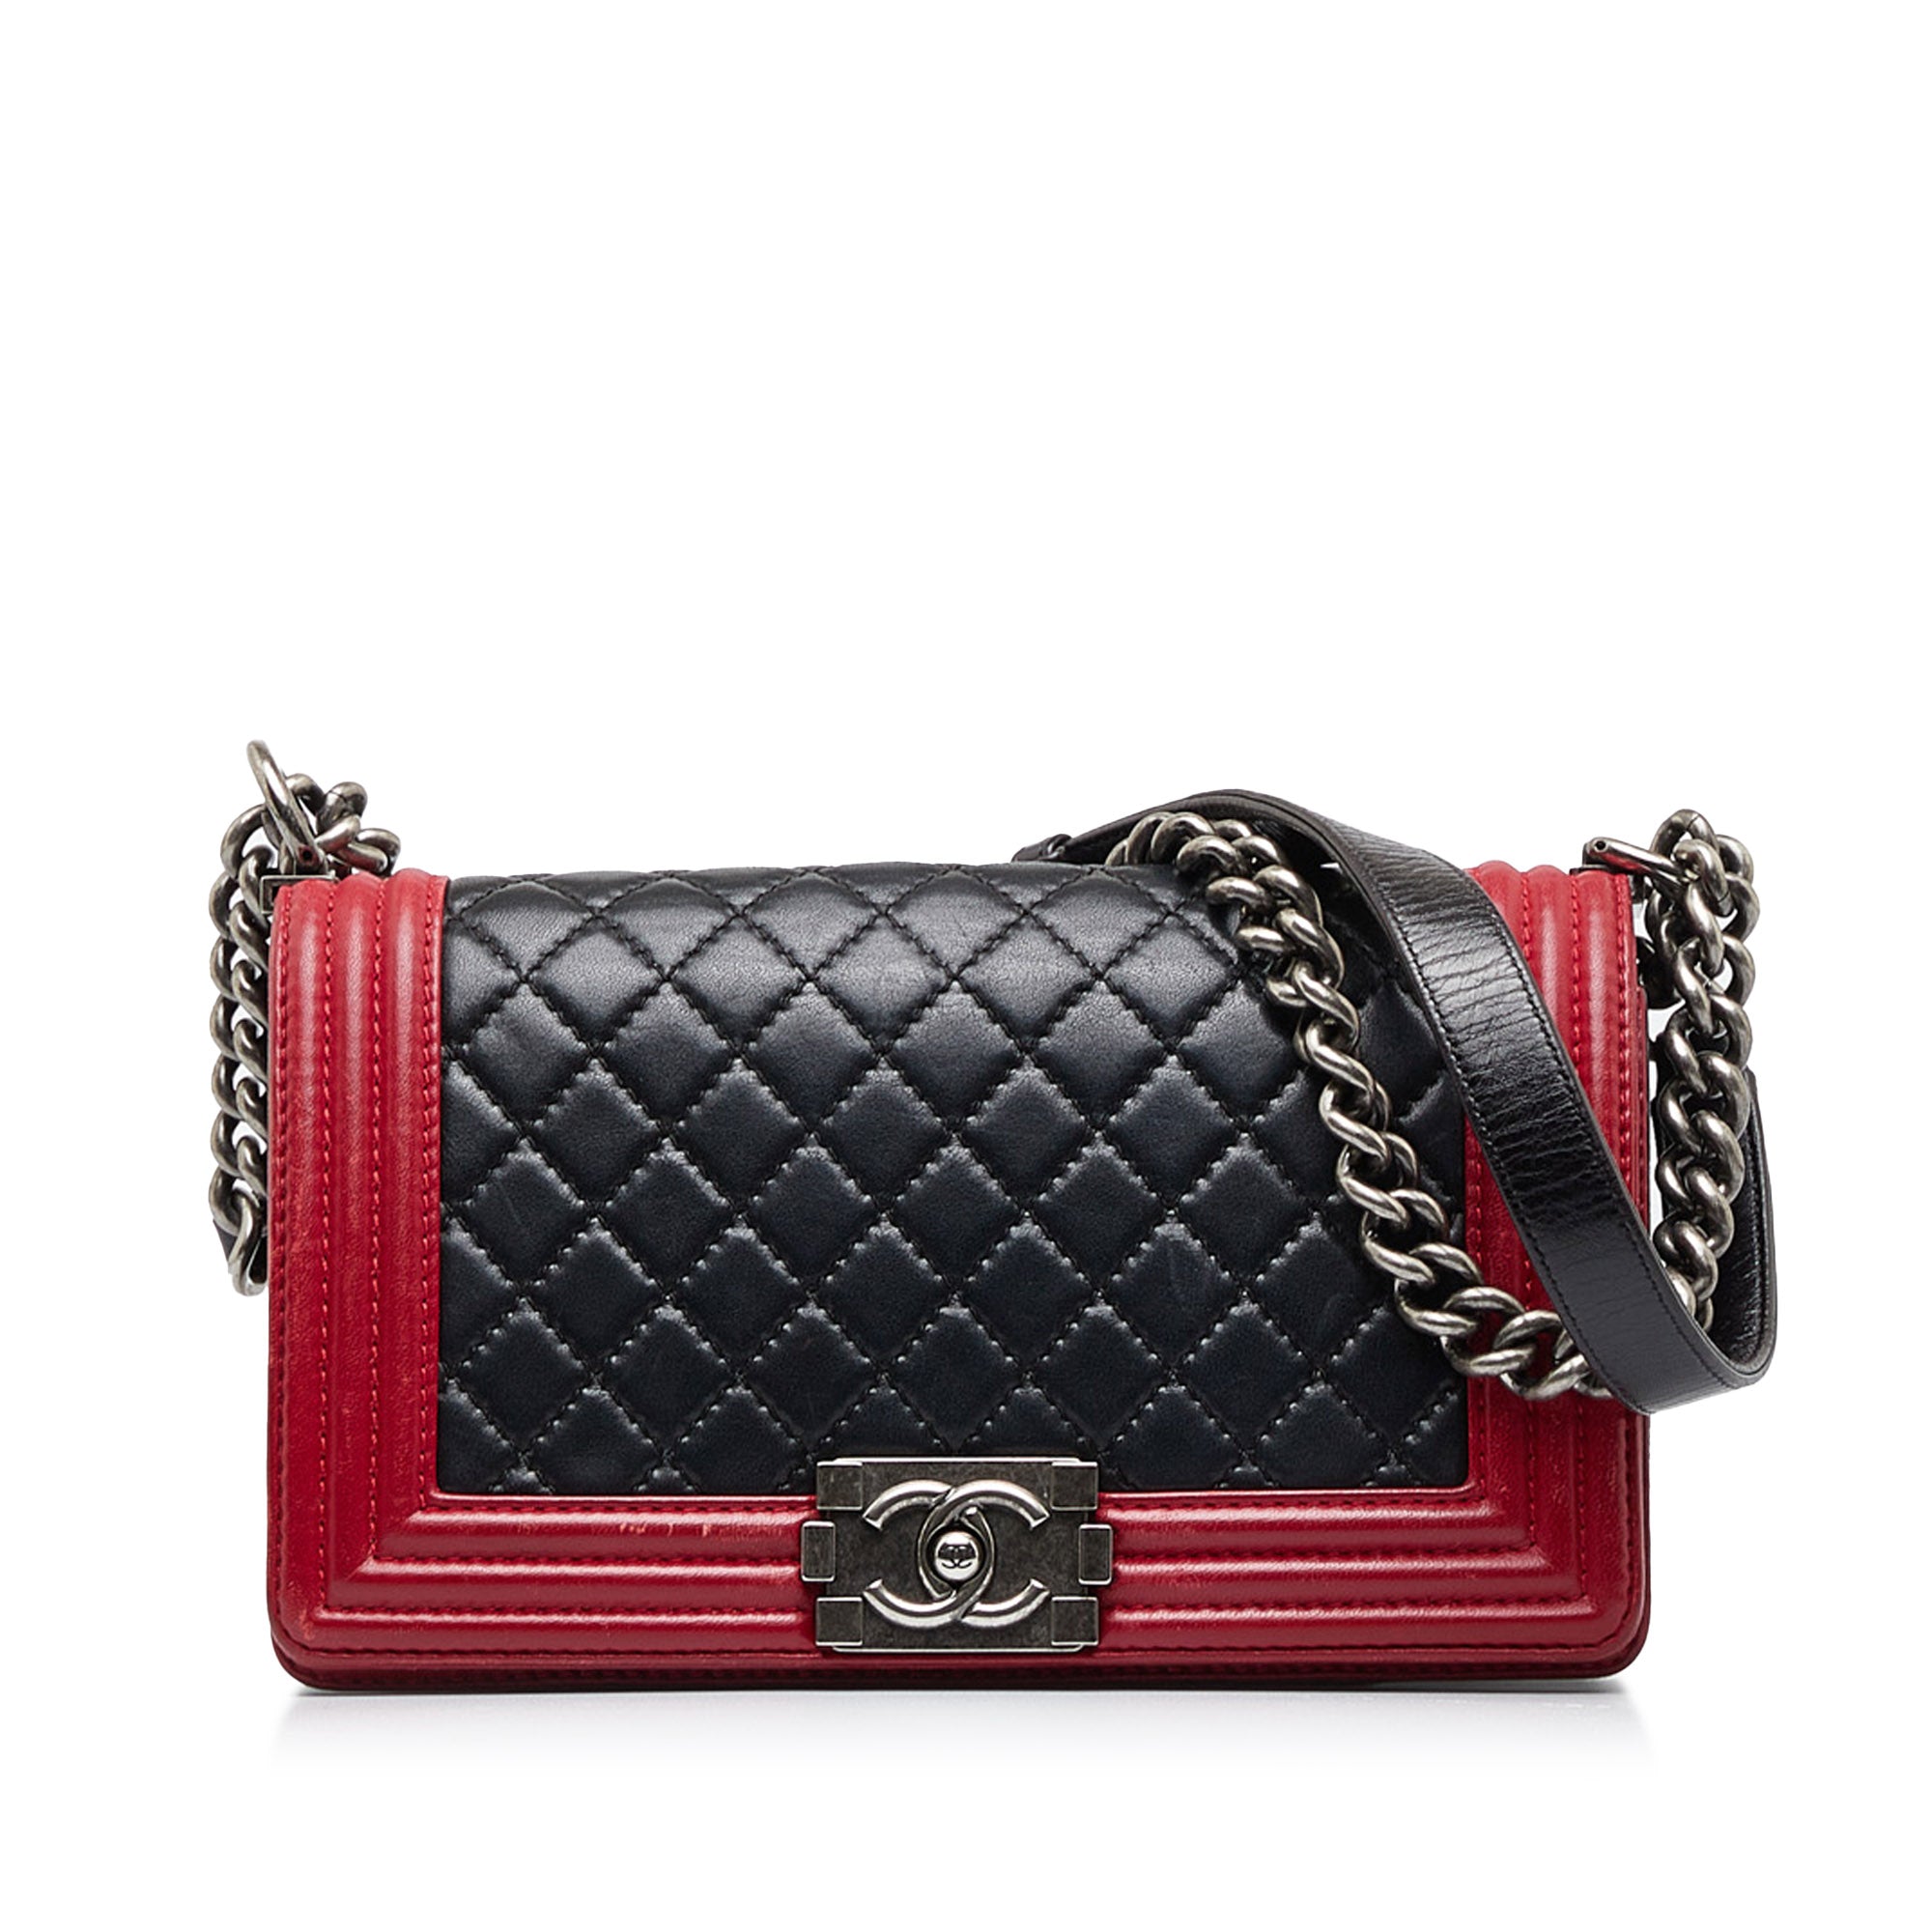 Chanel Timeless Medium Flap bag - Touched Vintage